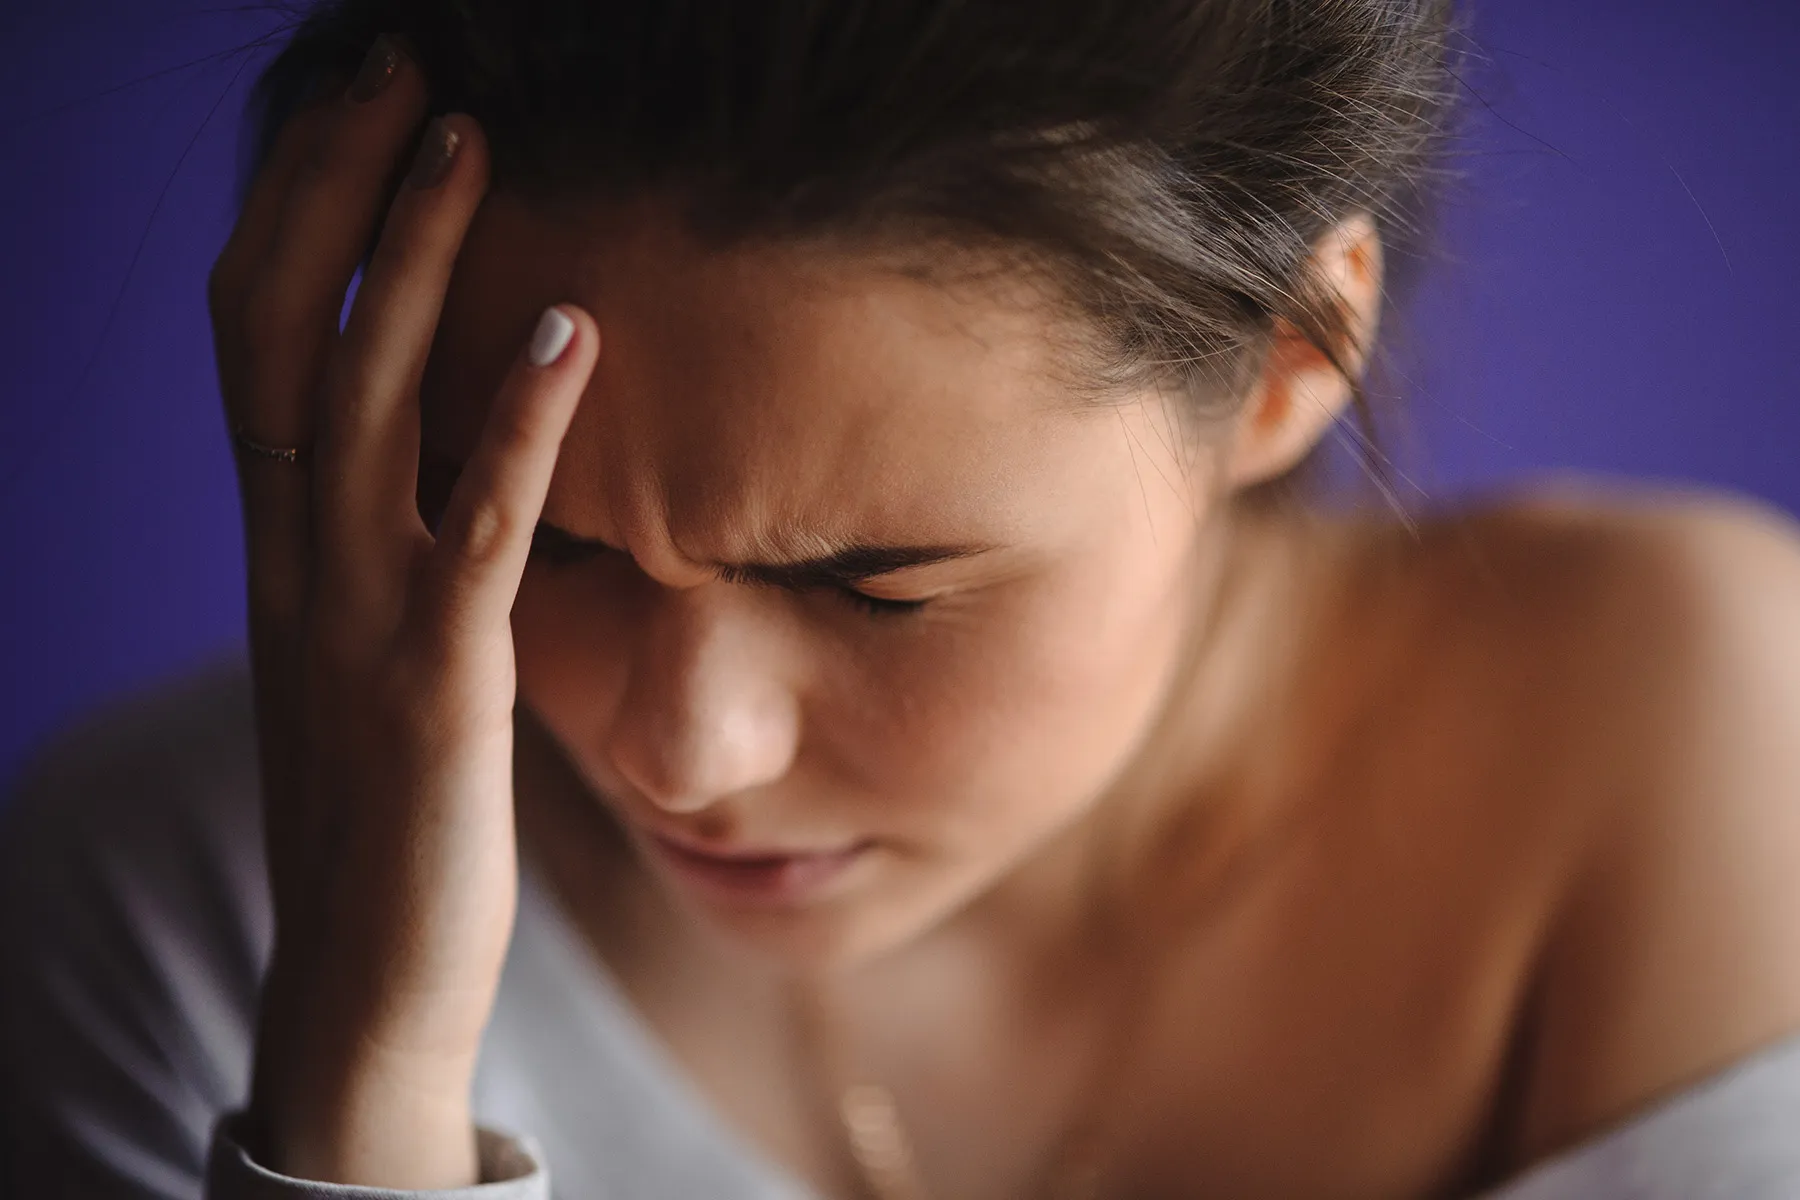 photo of woman with migraine